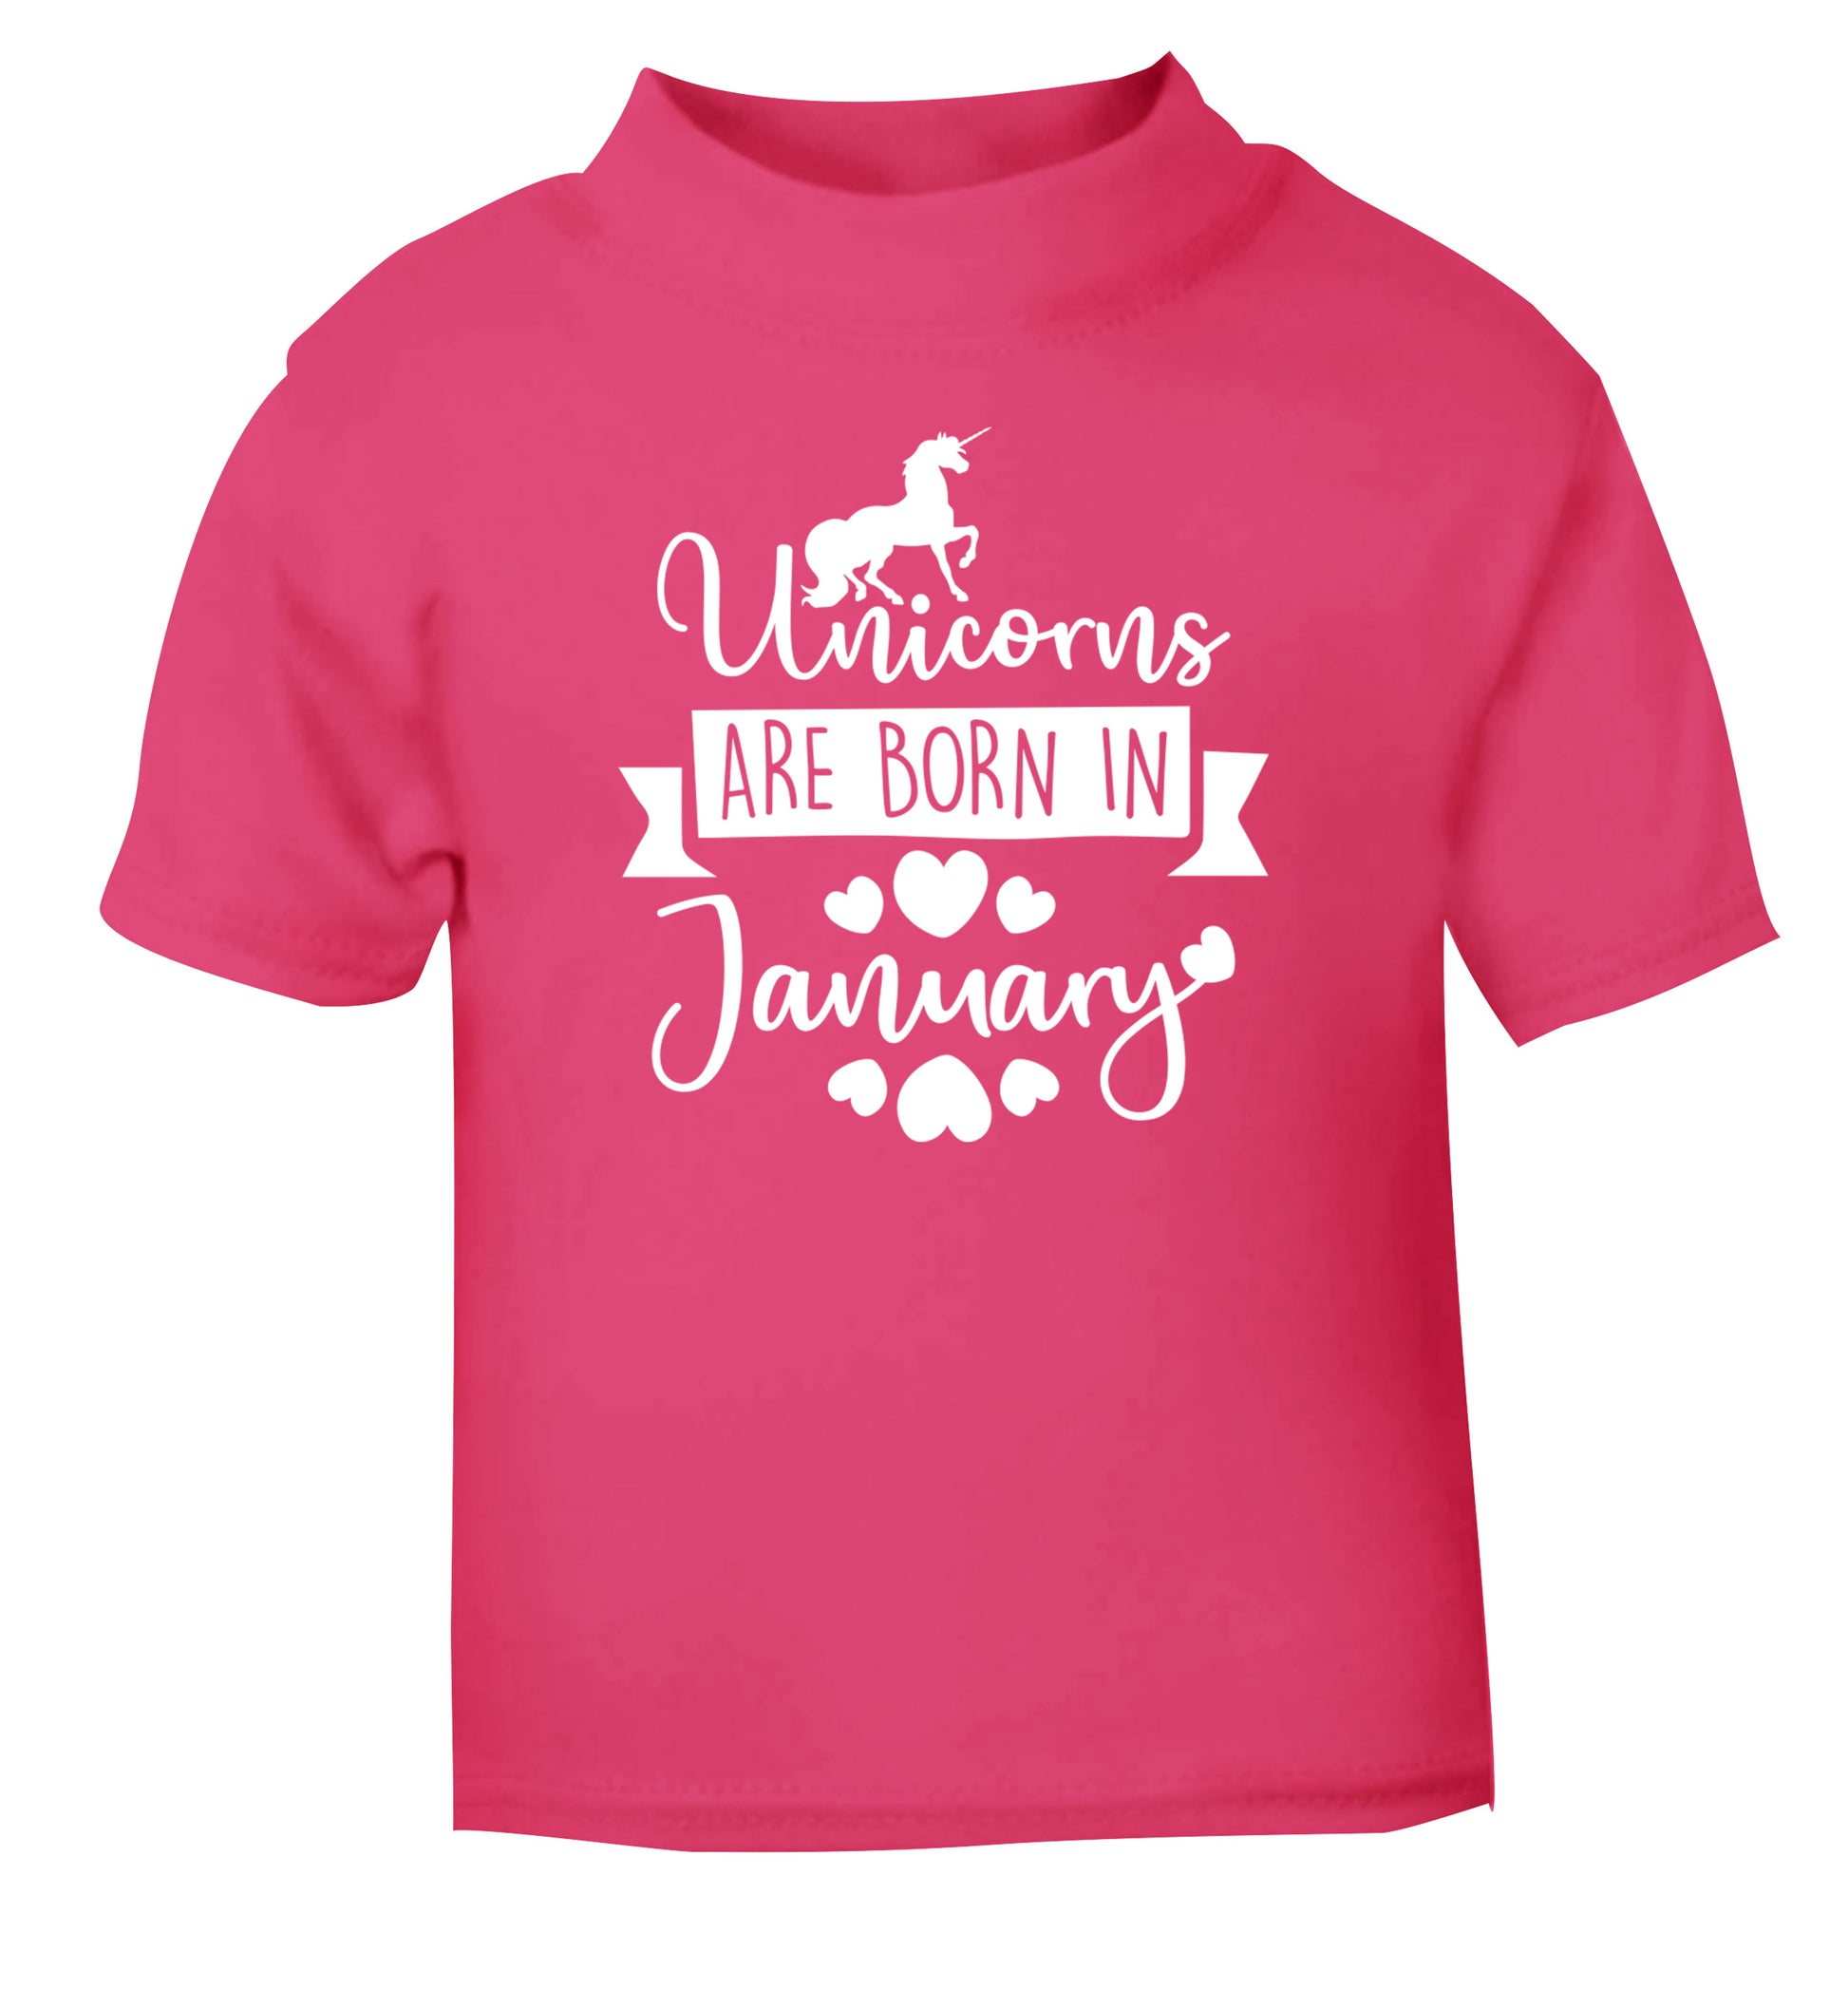 Unicorns are born in January pink Baby Toddler Tshirt 2 Years